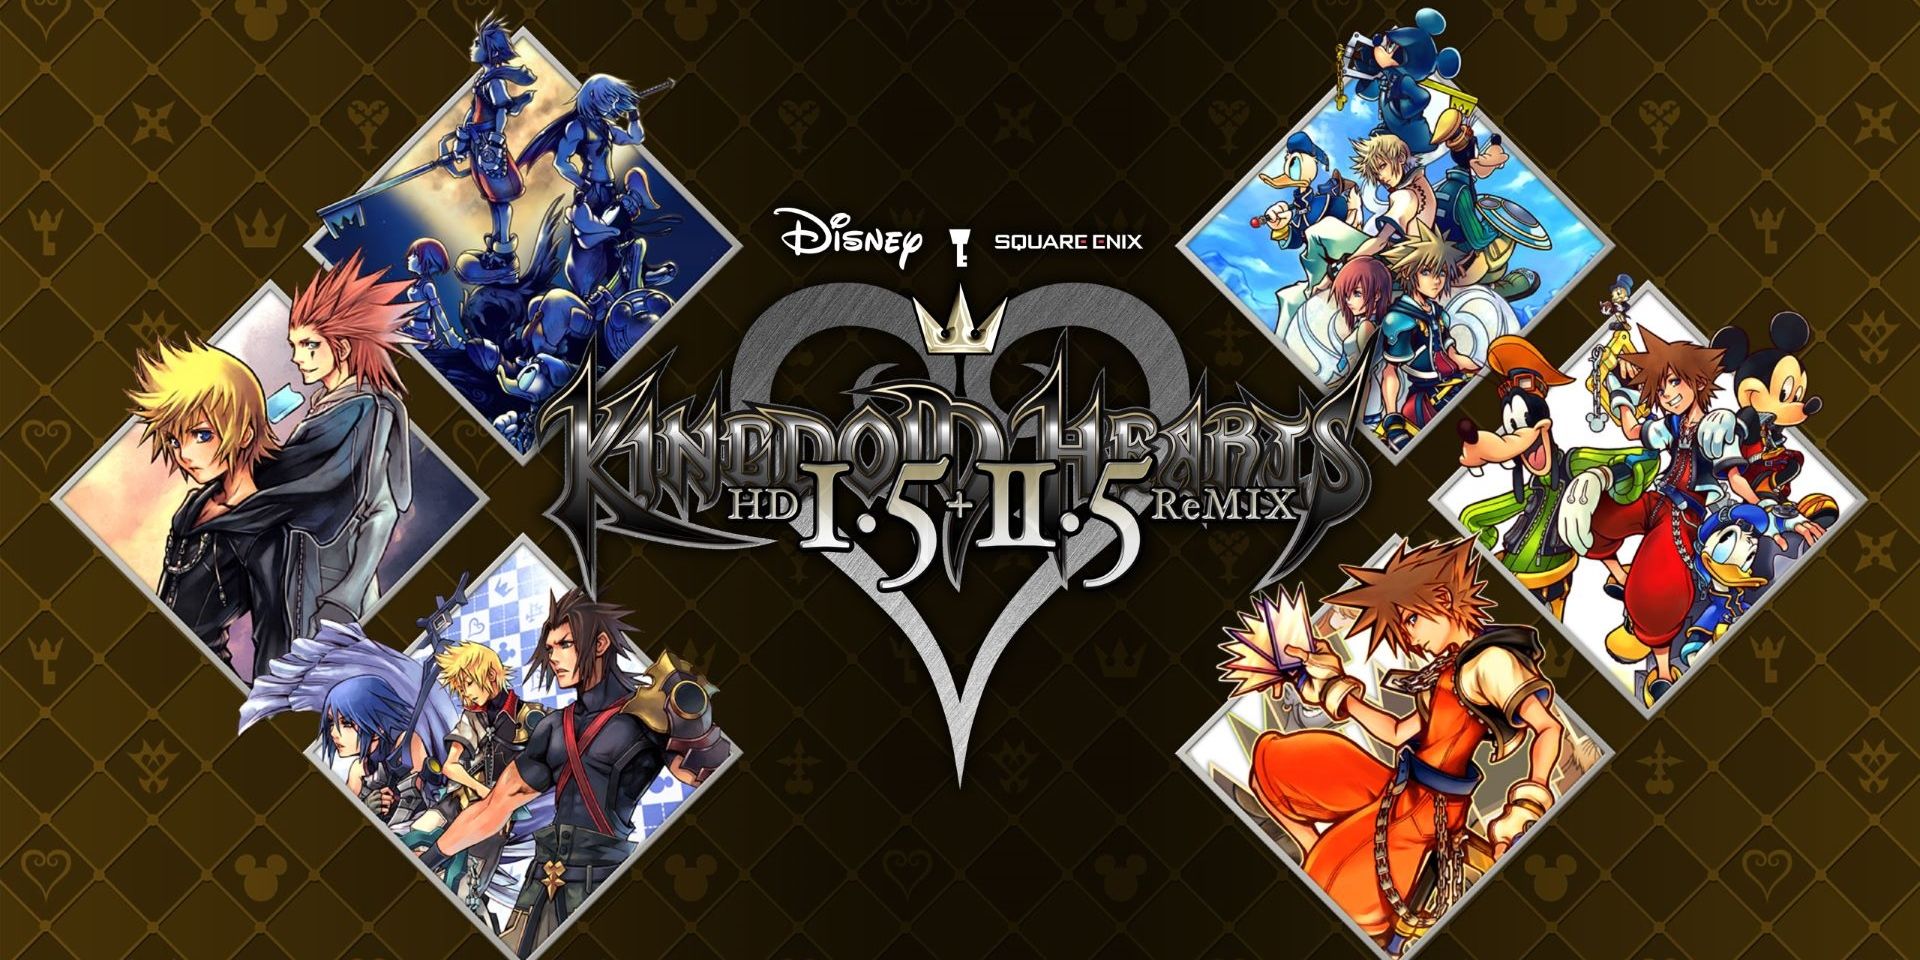 Kingdom Hearts 1.5 + 2.5 Remix cover arts from each game included in the package